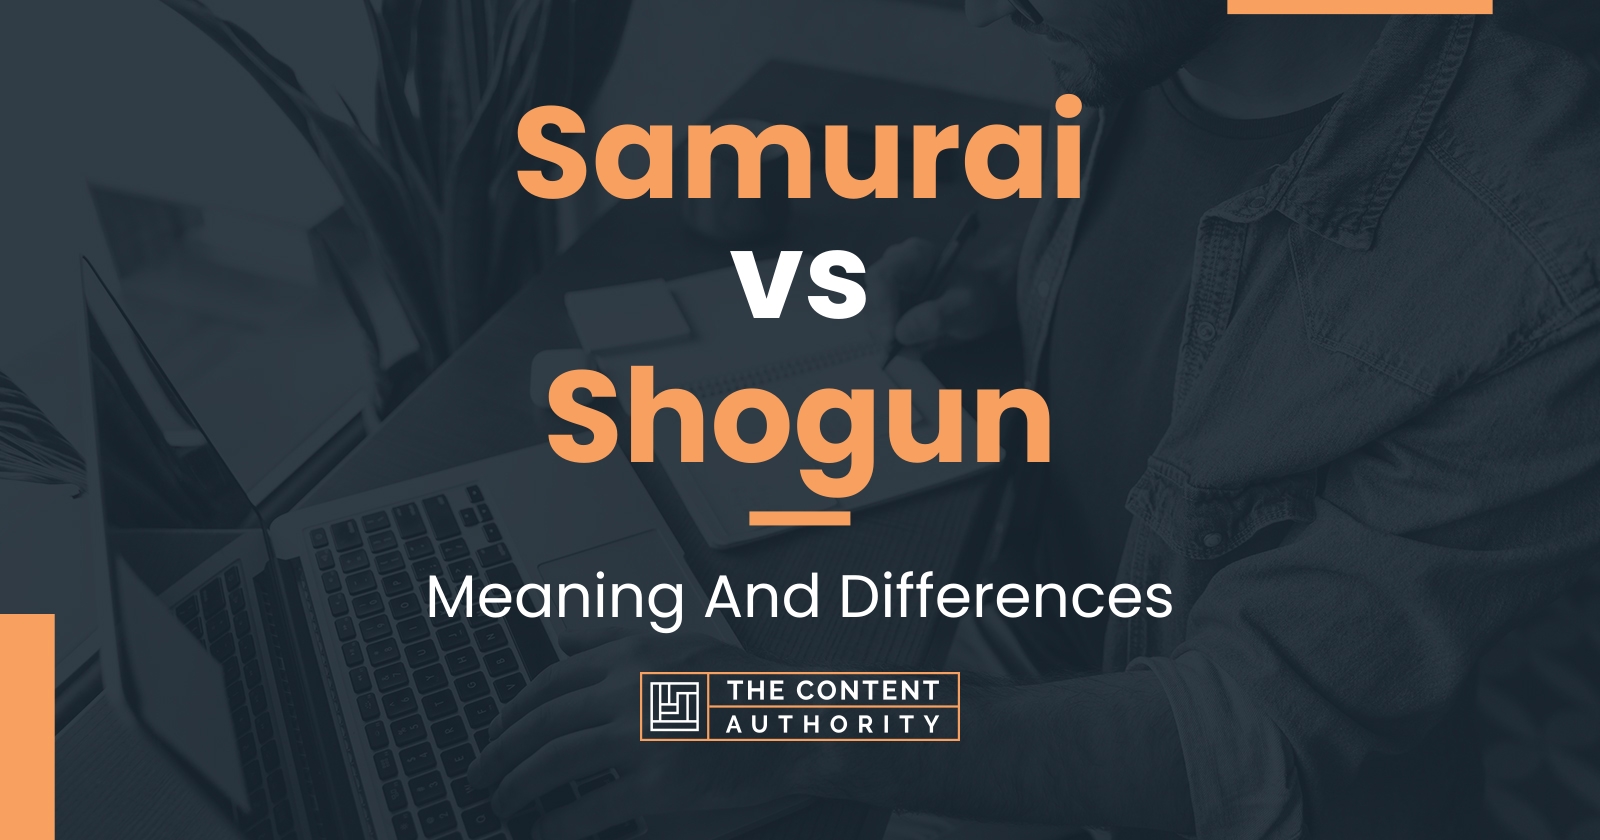 Samurai vs Shogun: Meaning And Differences